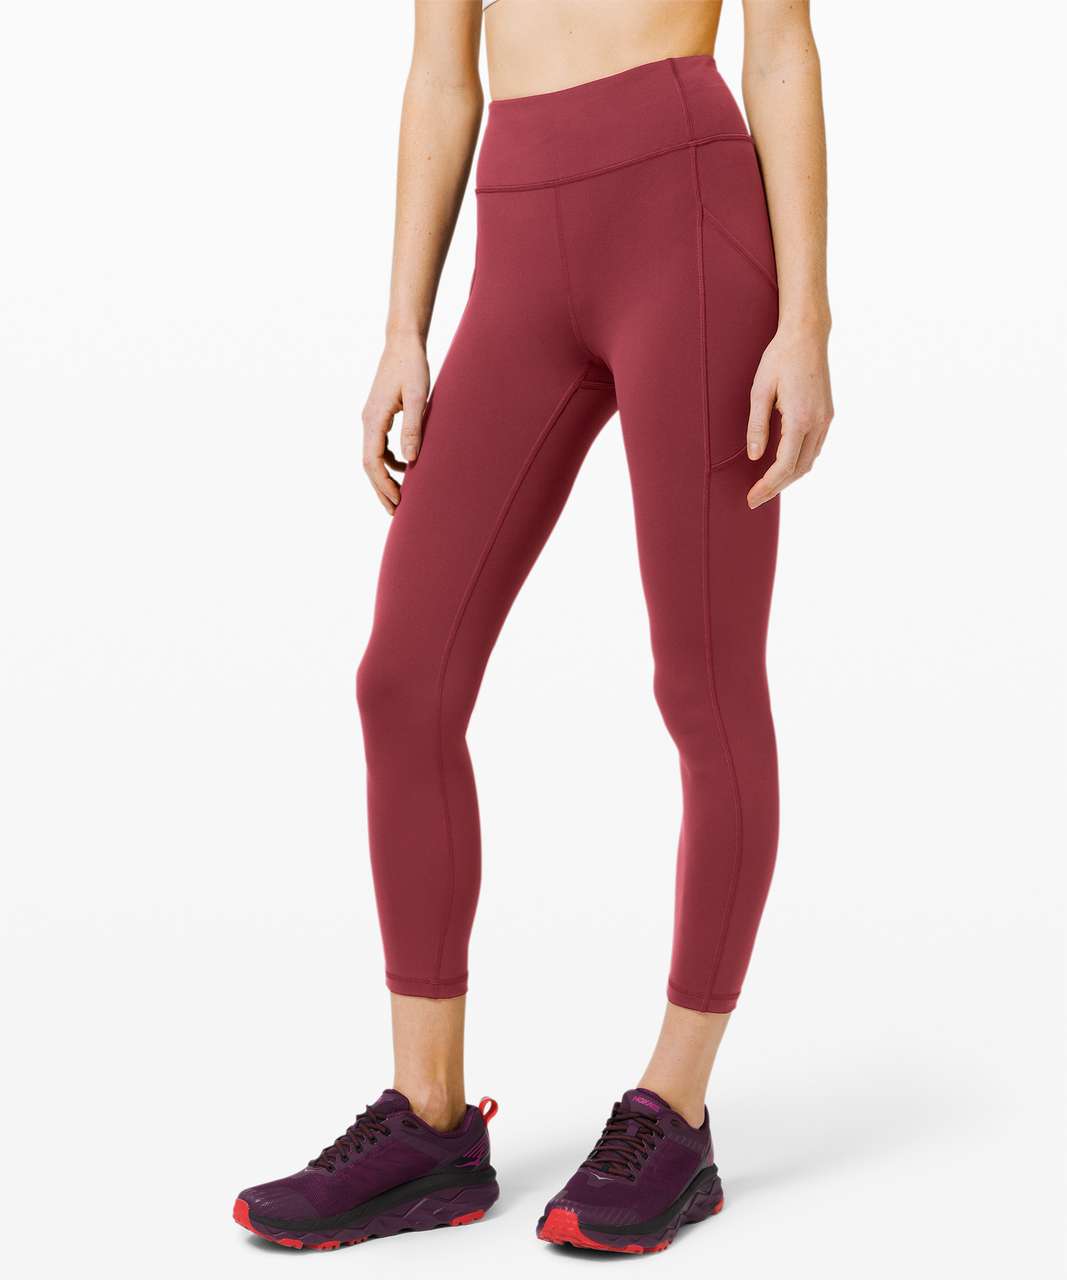 Lululemon Invigorate High-Rise Tight 25 Chianti Red Size 8 - $66 (48% Off  Retail) - From Ashleigh